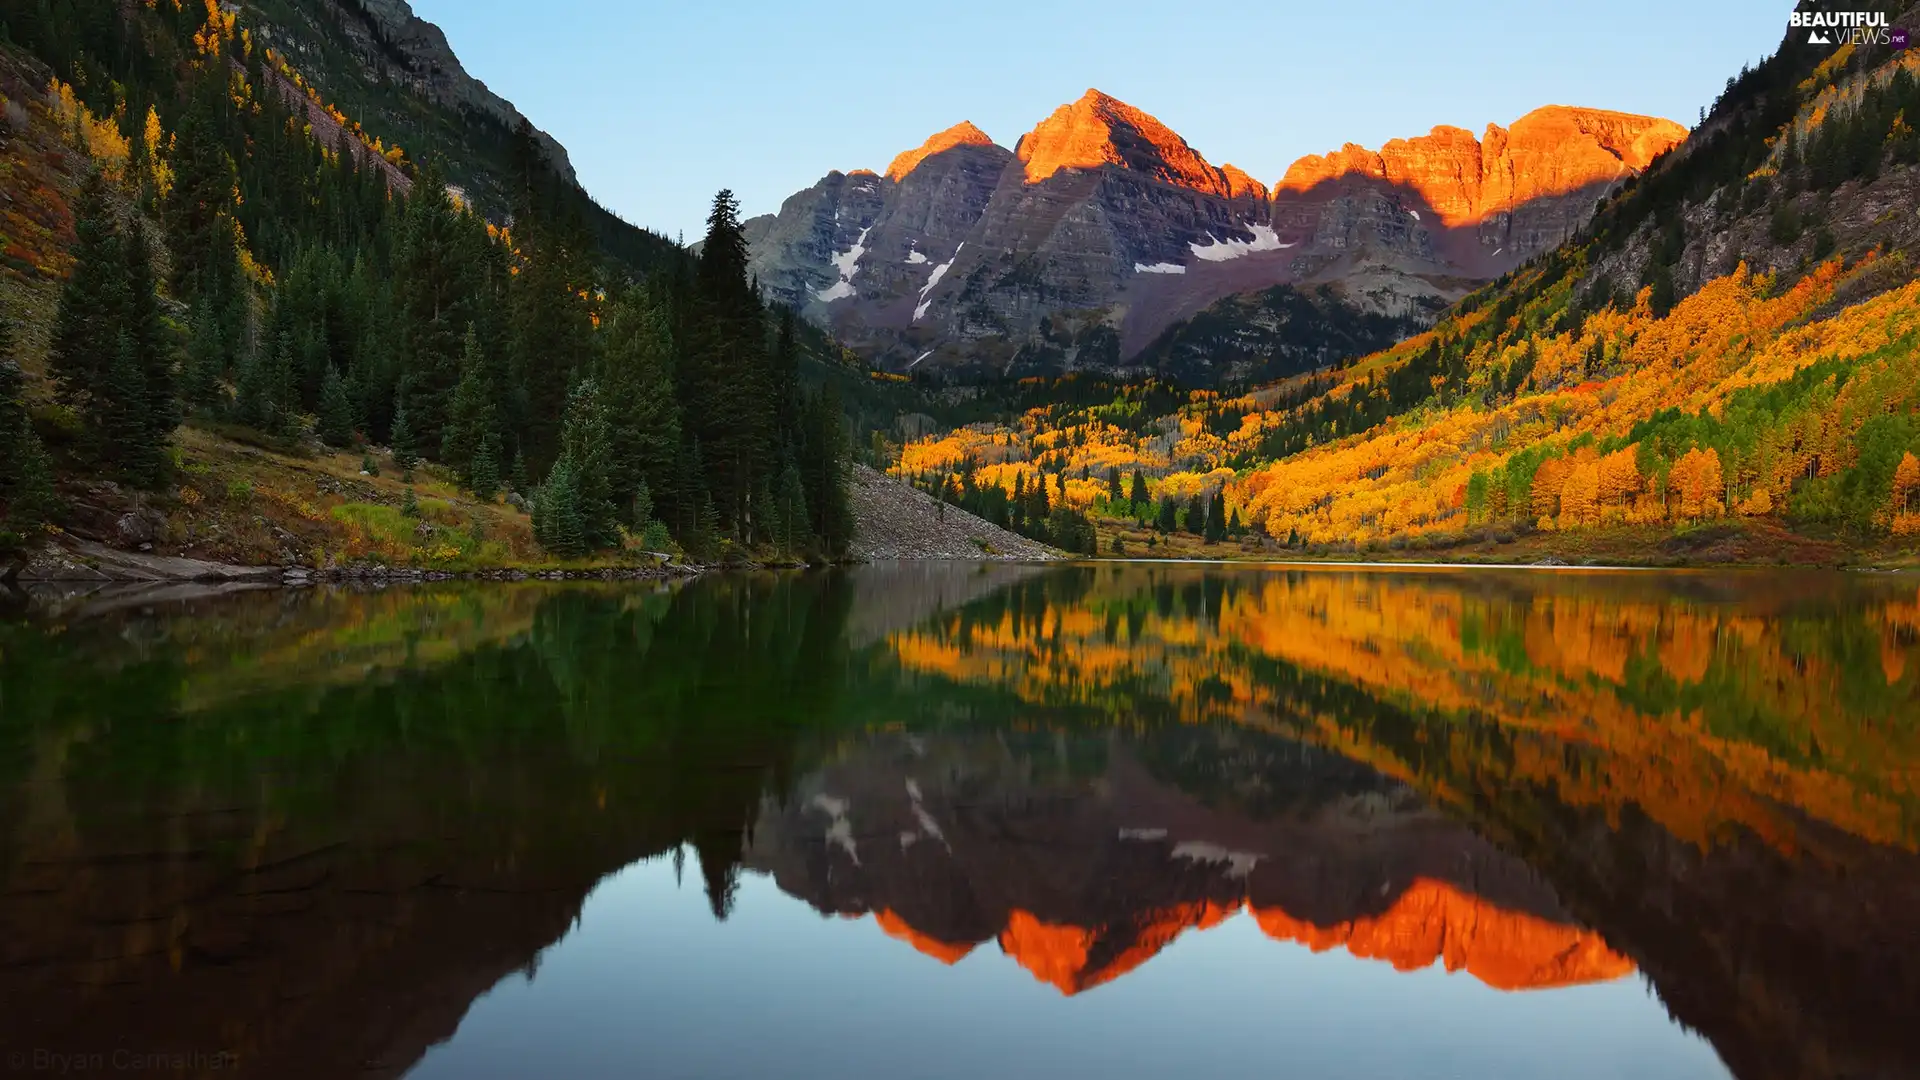 State of Colorado, The United States, rocky mountains, Maroon Bells Peaks, reflection, autumn, trees, viewes, Maroon Lake